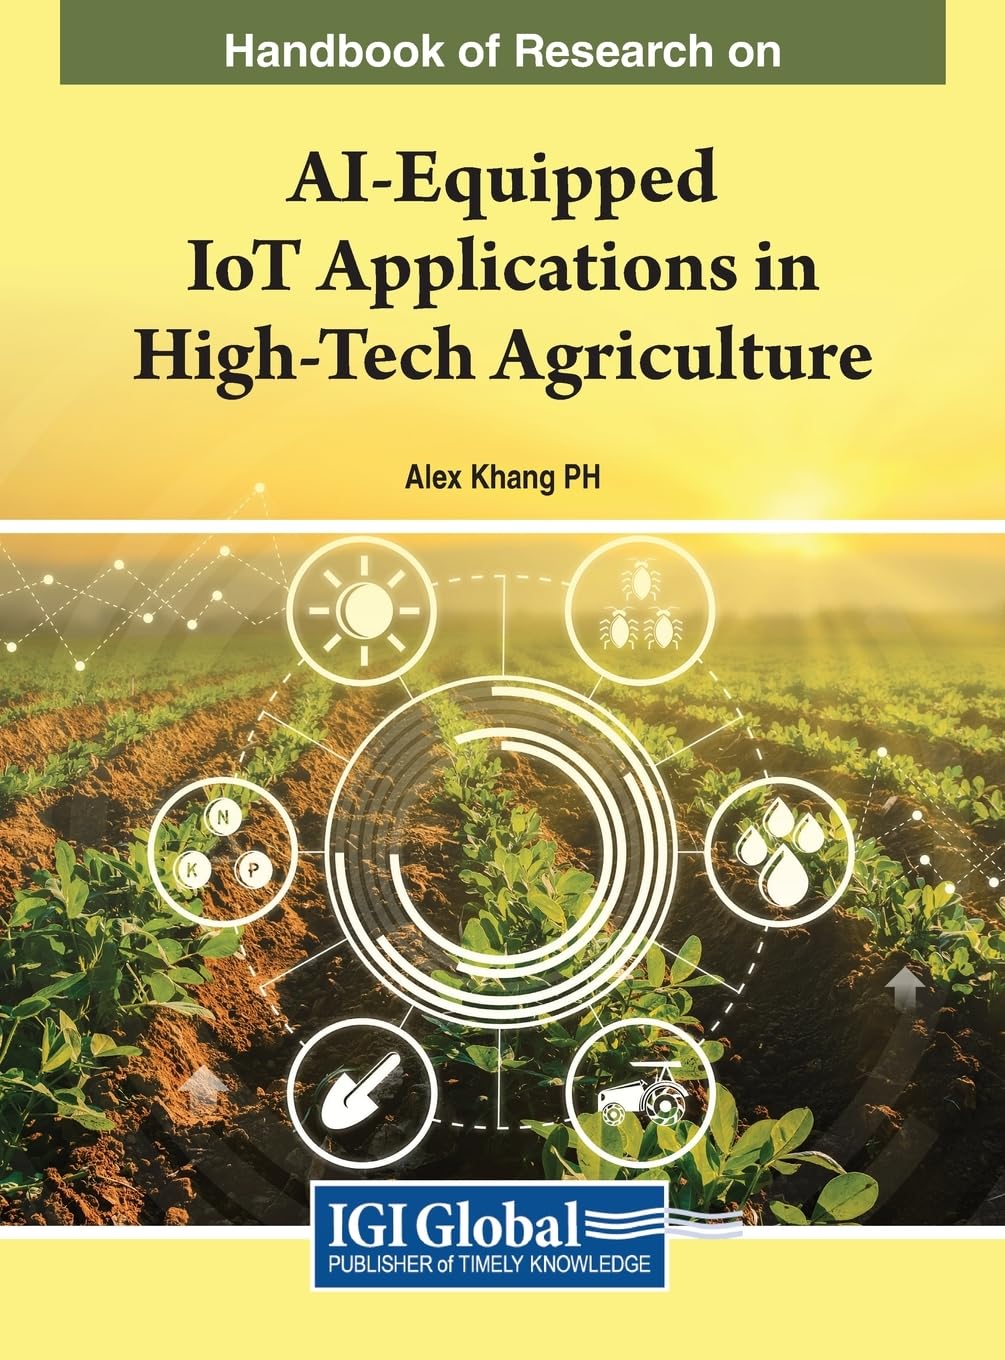 Handbook of Research on Advanced Technologies and AI-Equipped IoT Applications in High-Tech Agriculture